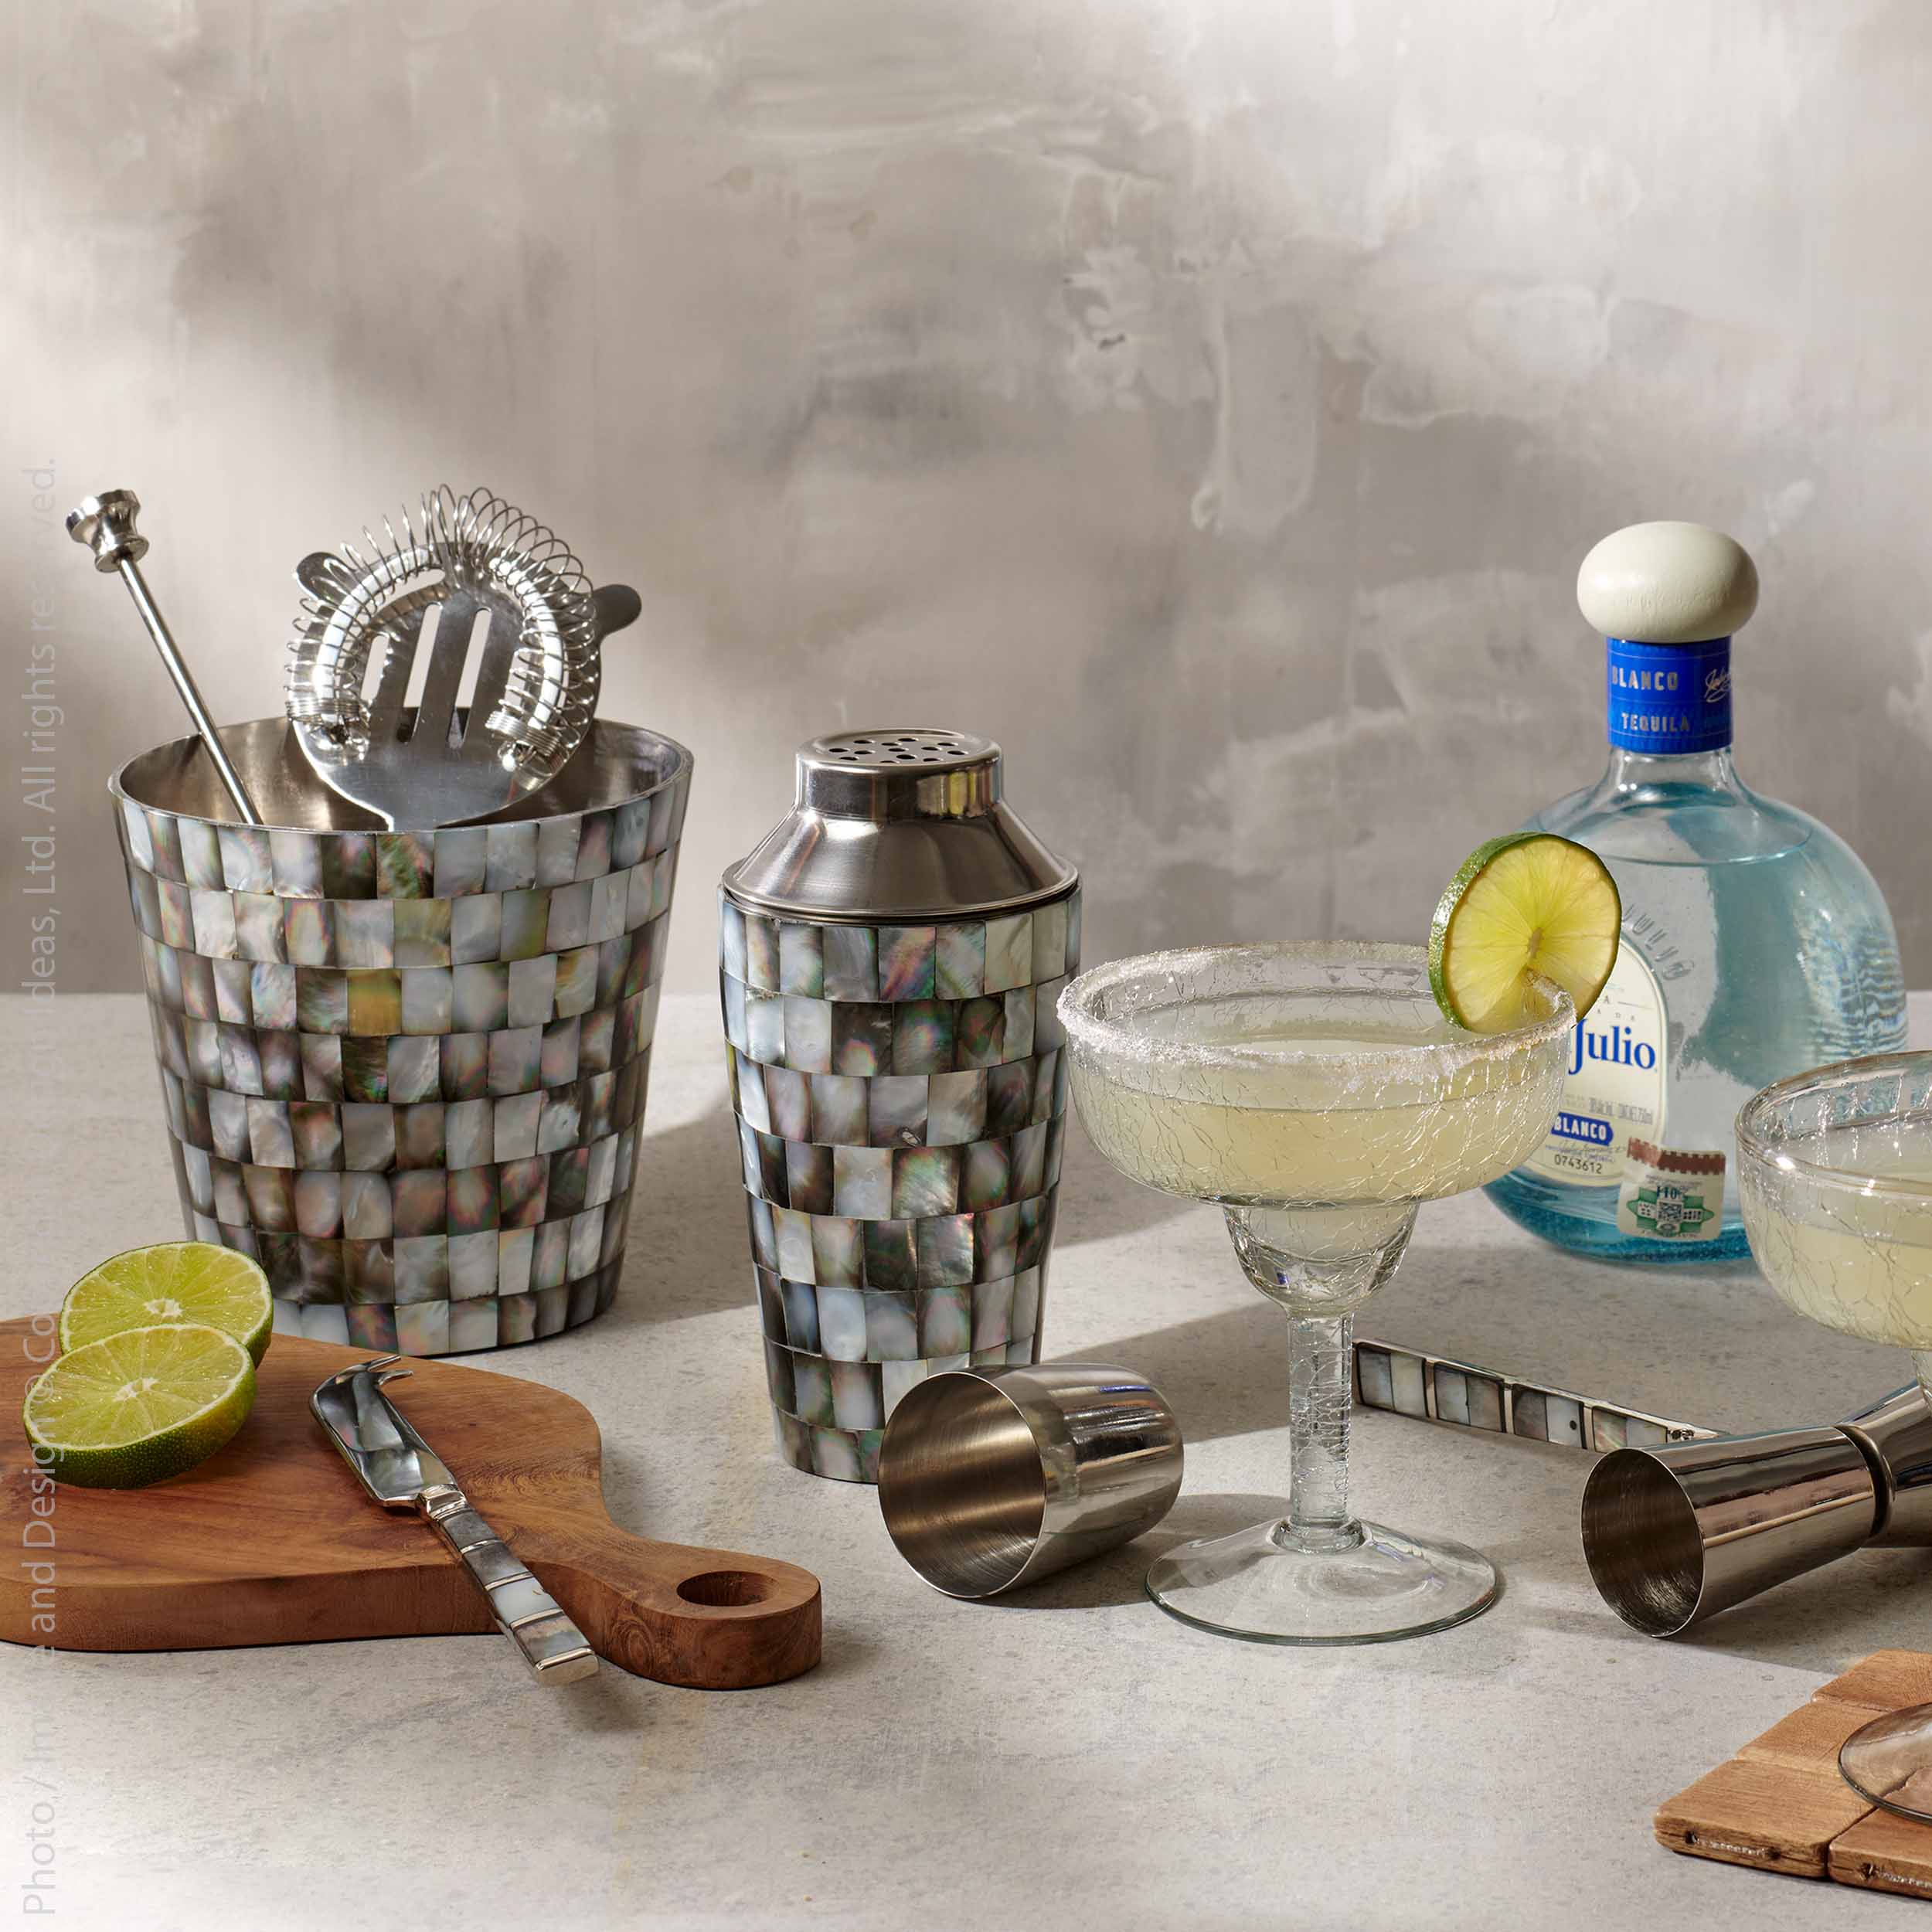 Abalon™ Handmade Stainless Steel, Brass and Mother of Pearl Barware (set of 5) - (colors: Silver) | Premium Utensils from the Abalon™ collection | made with Stainless Steel, Brass and Mother of Pearl for long lasting use